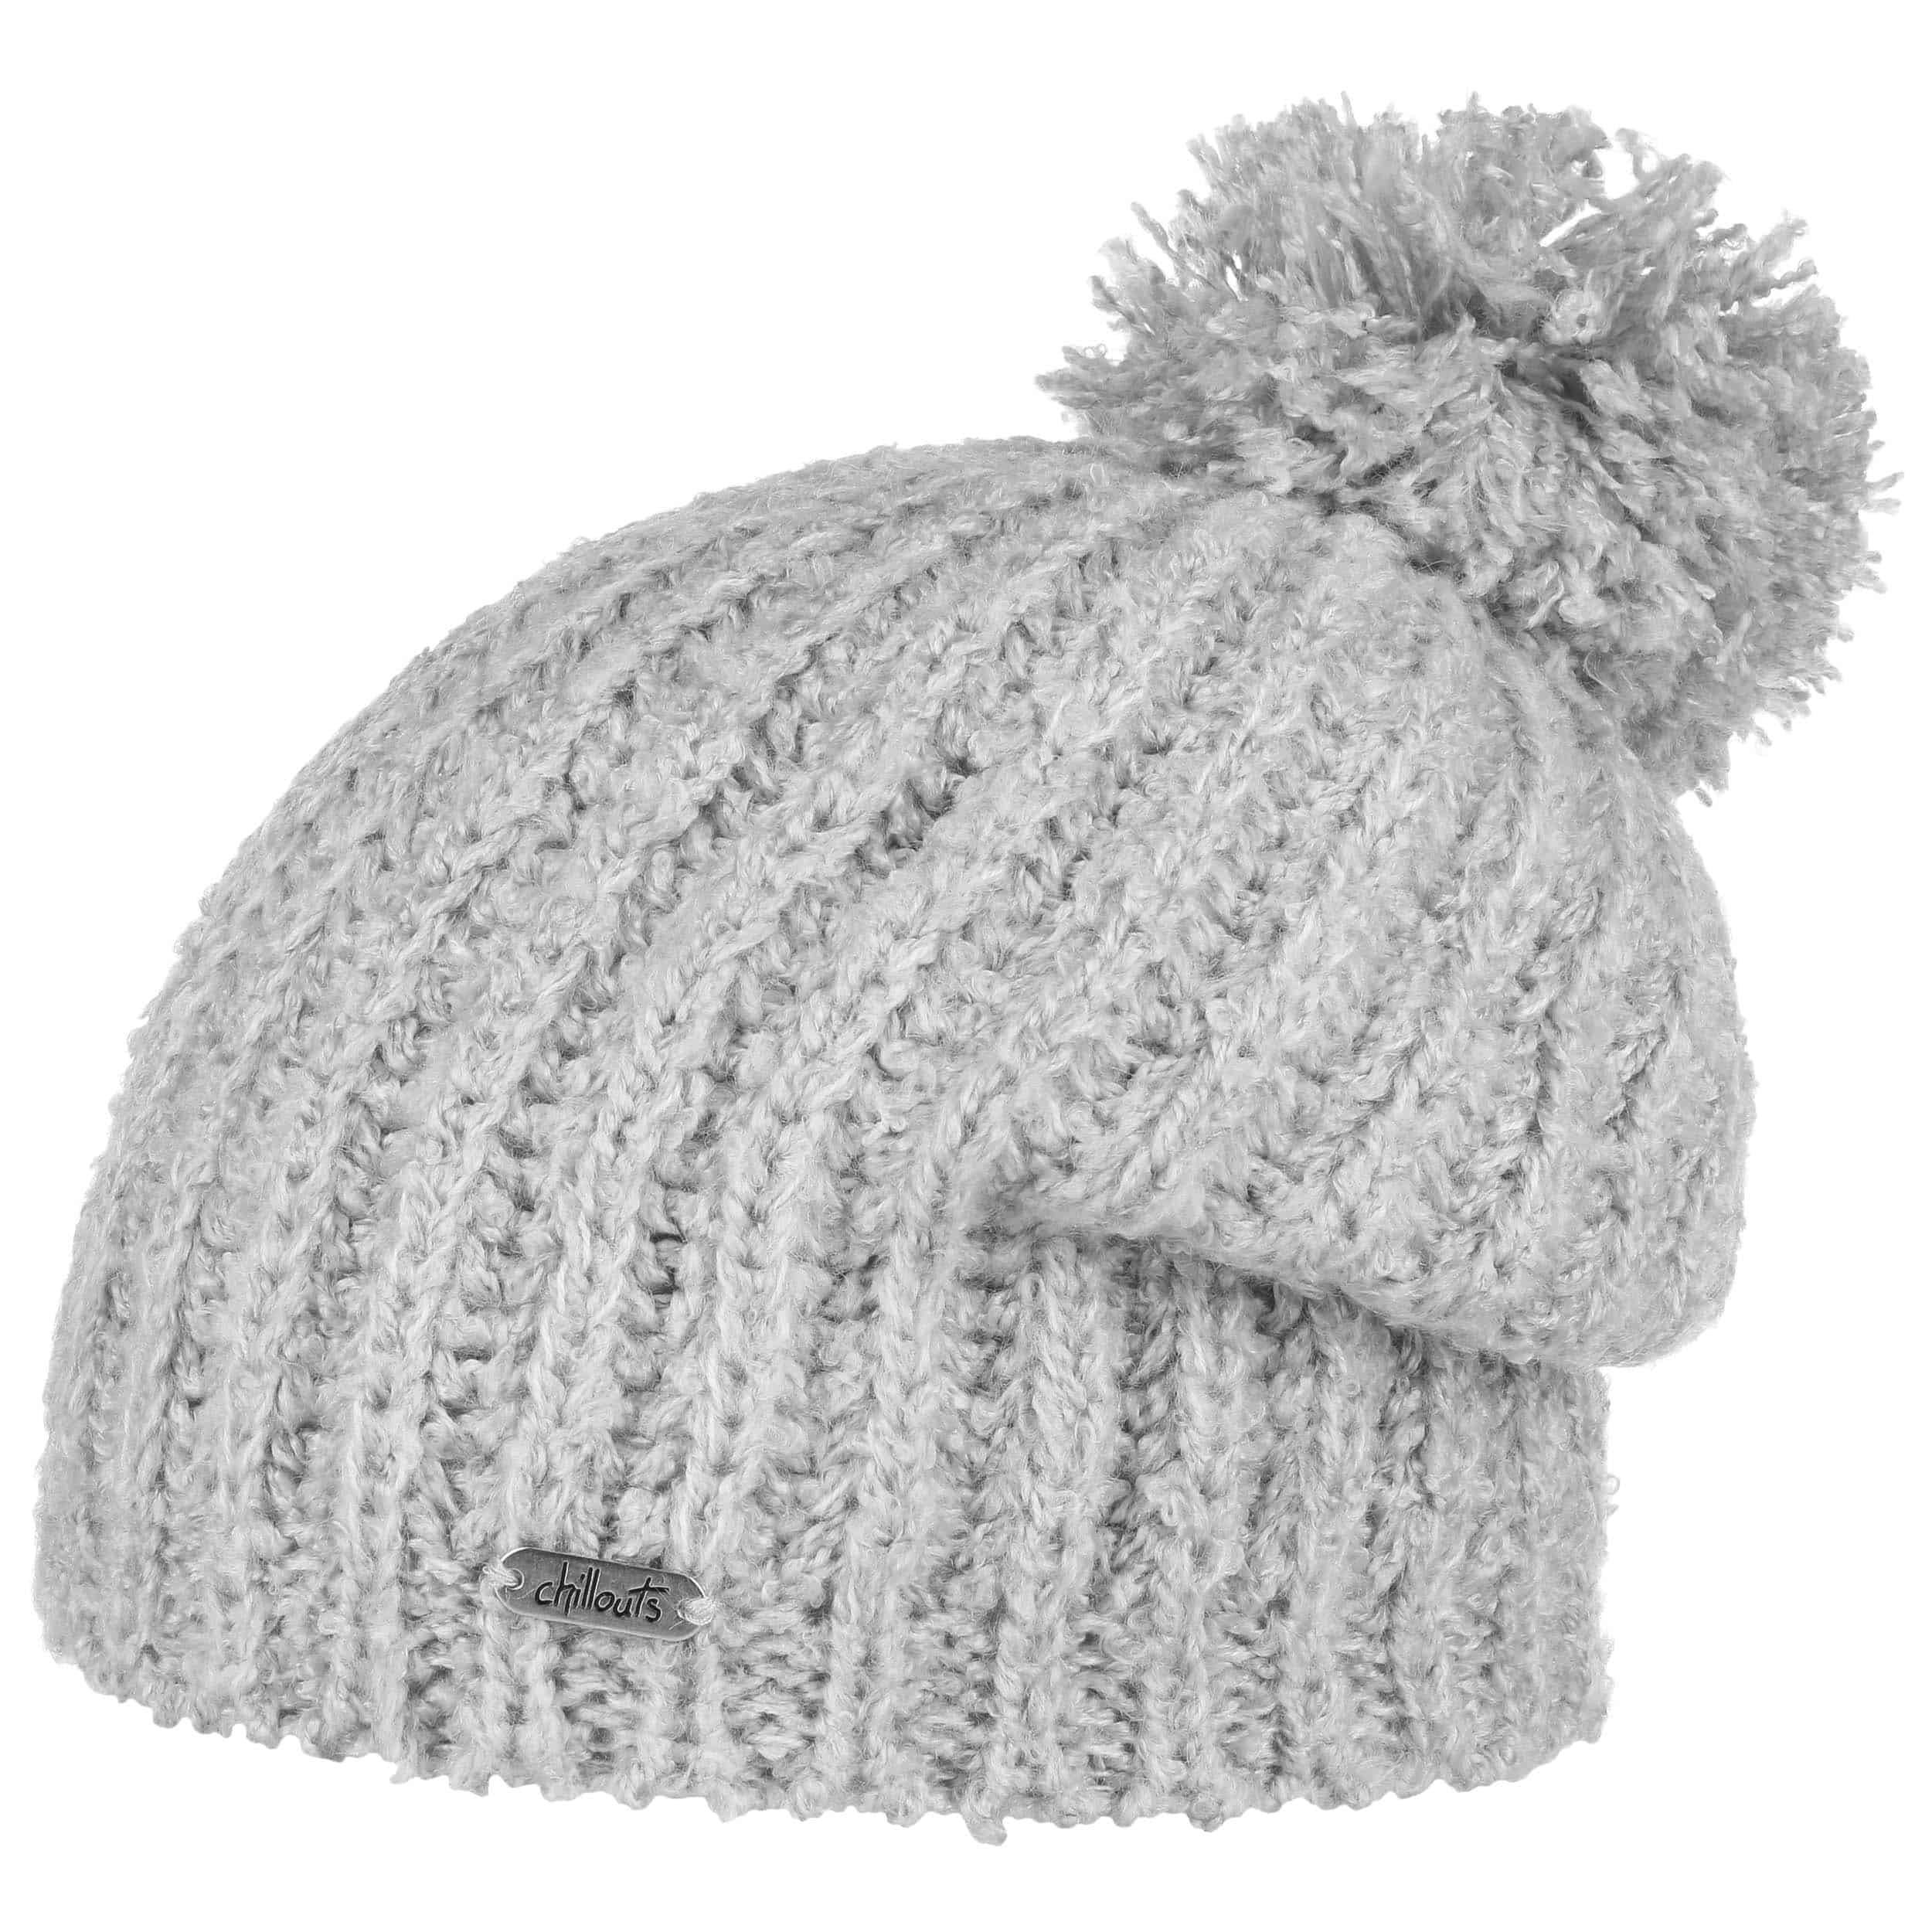 Cuddly Beanie Knit Hat by Chillouts - 21,95 £